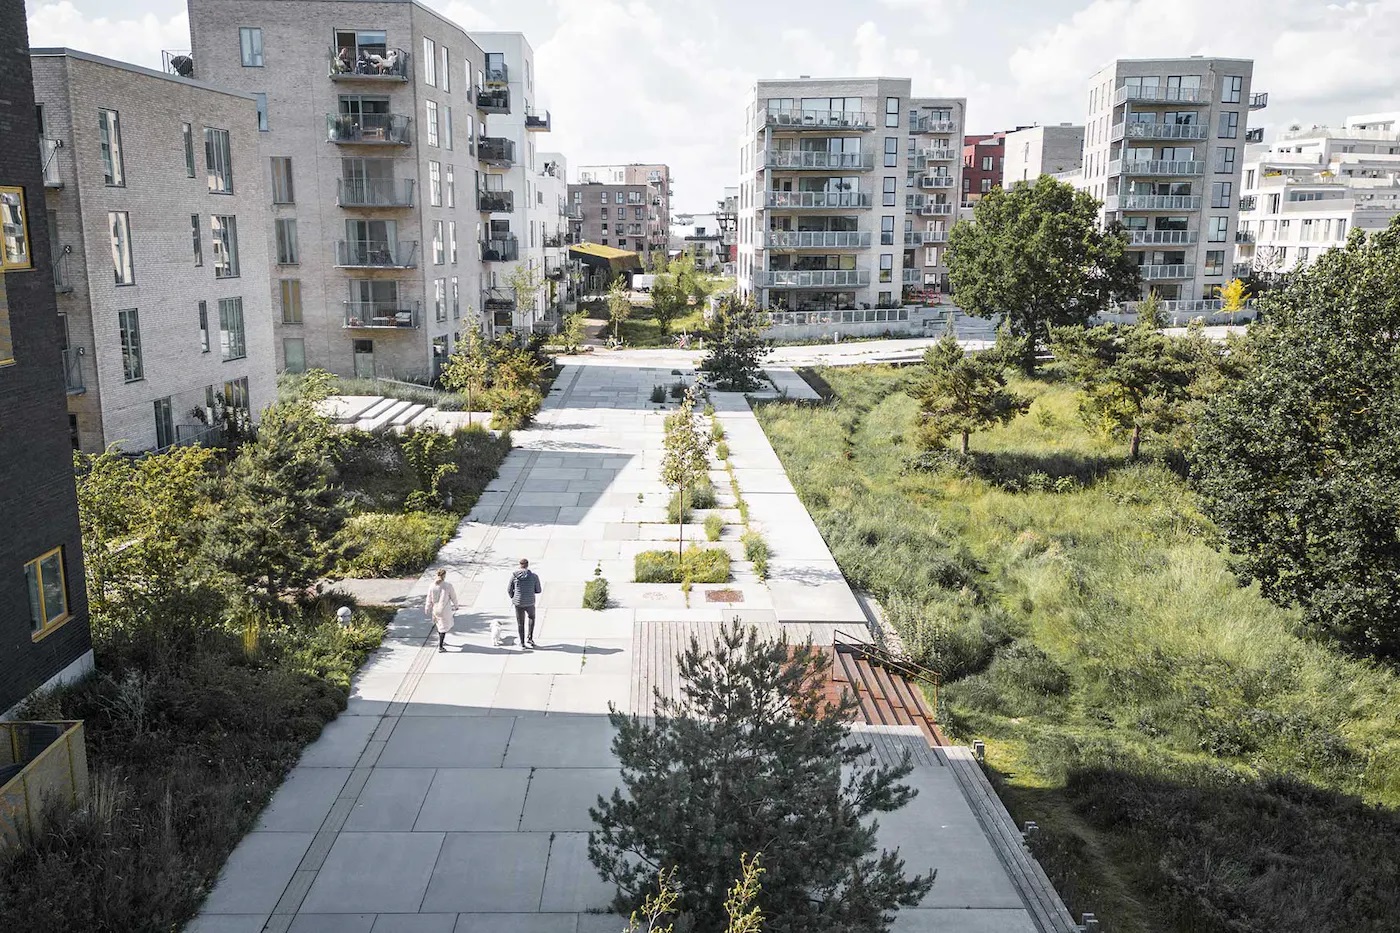 LUSH LANDSCAPE COMPLETED FOR NEW NEIGHBOURHOOD IN KØGE